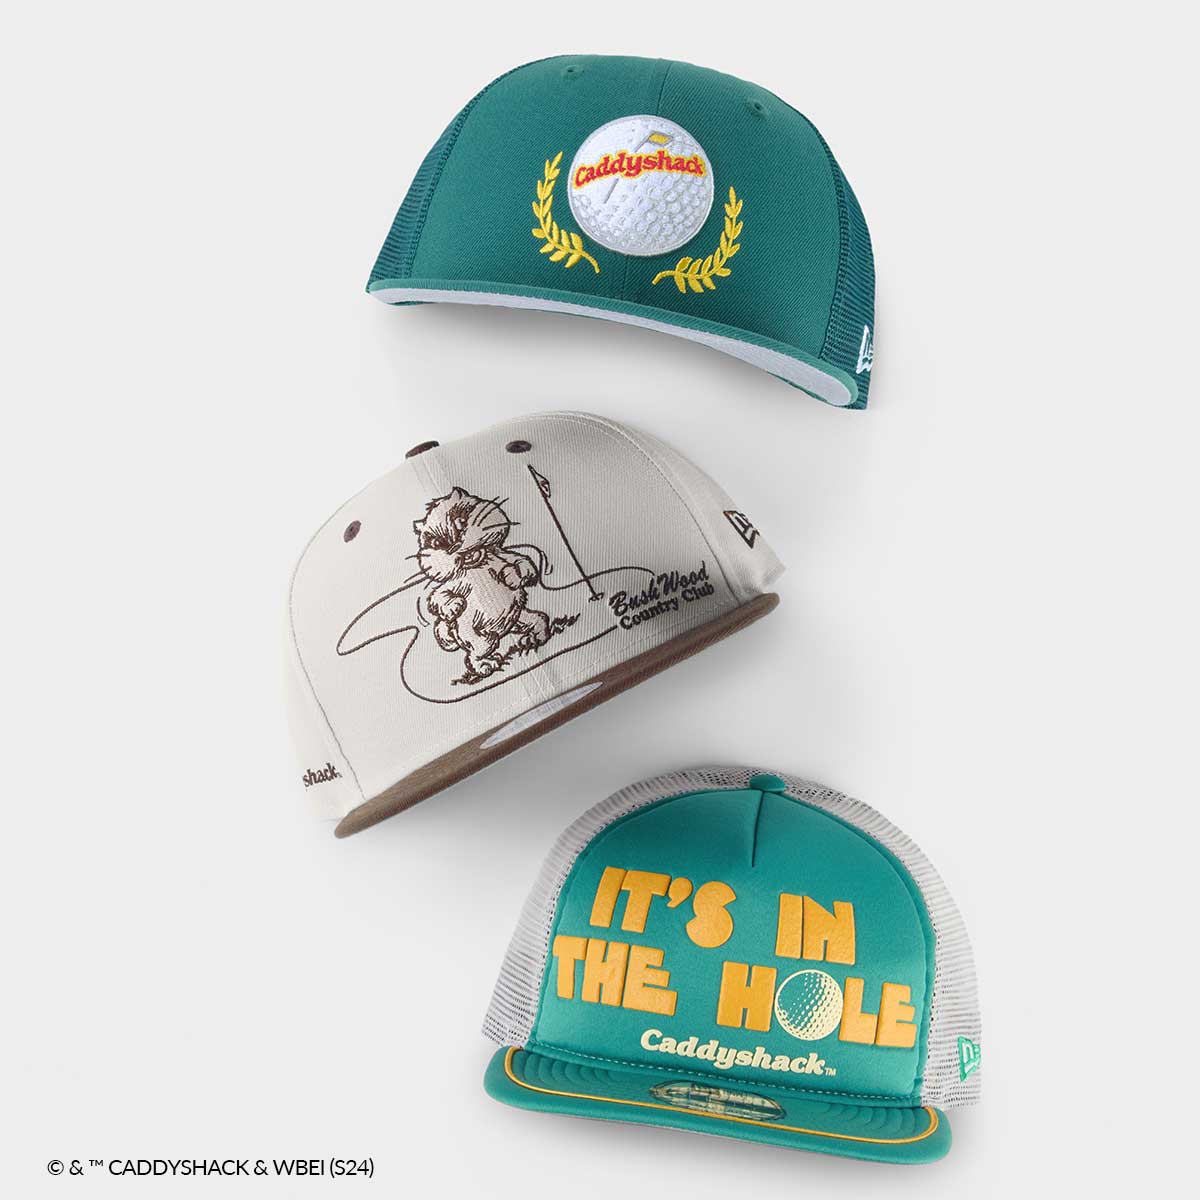 Shop the Caddyshack collection 